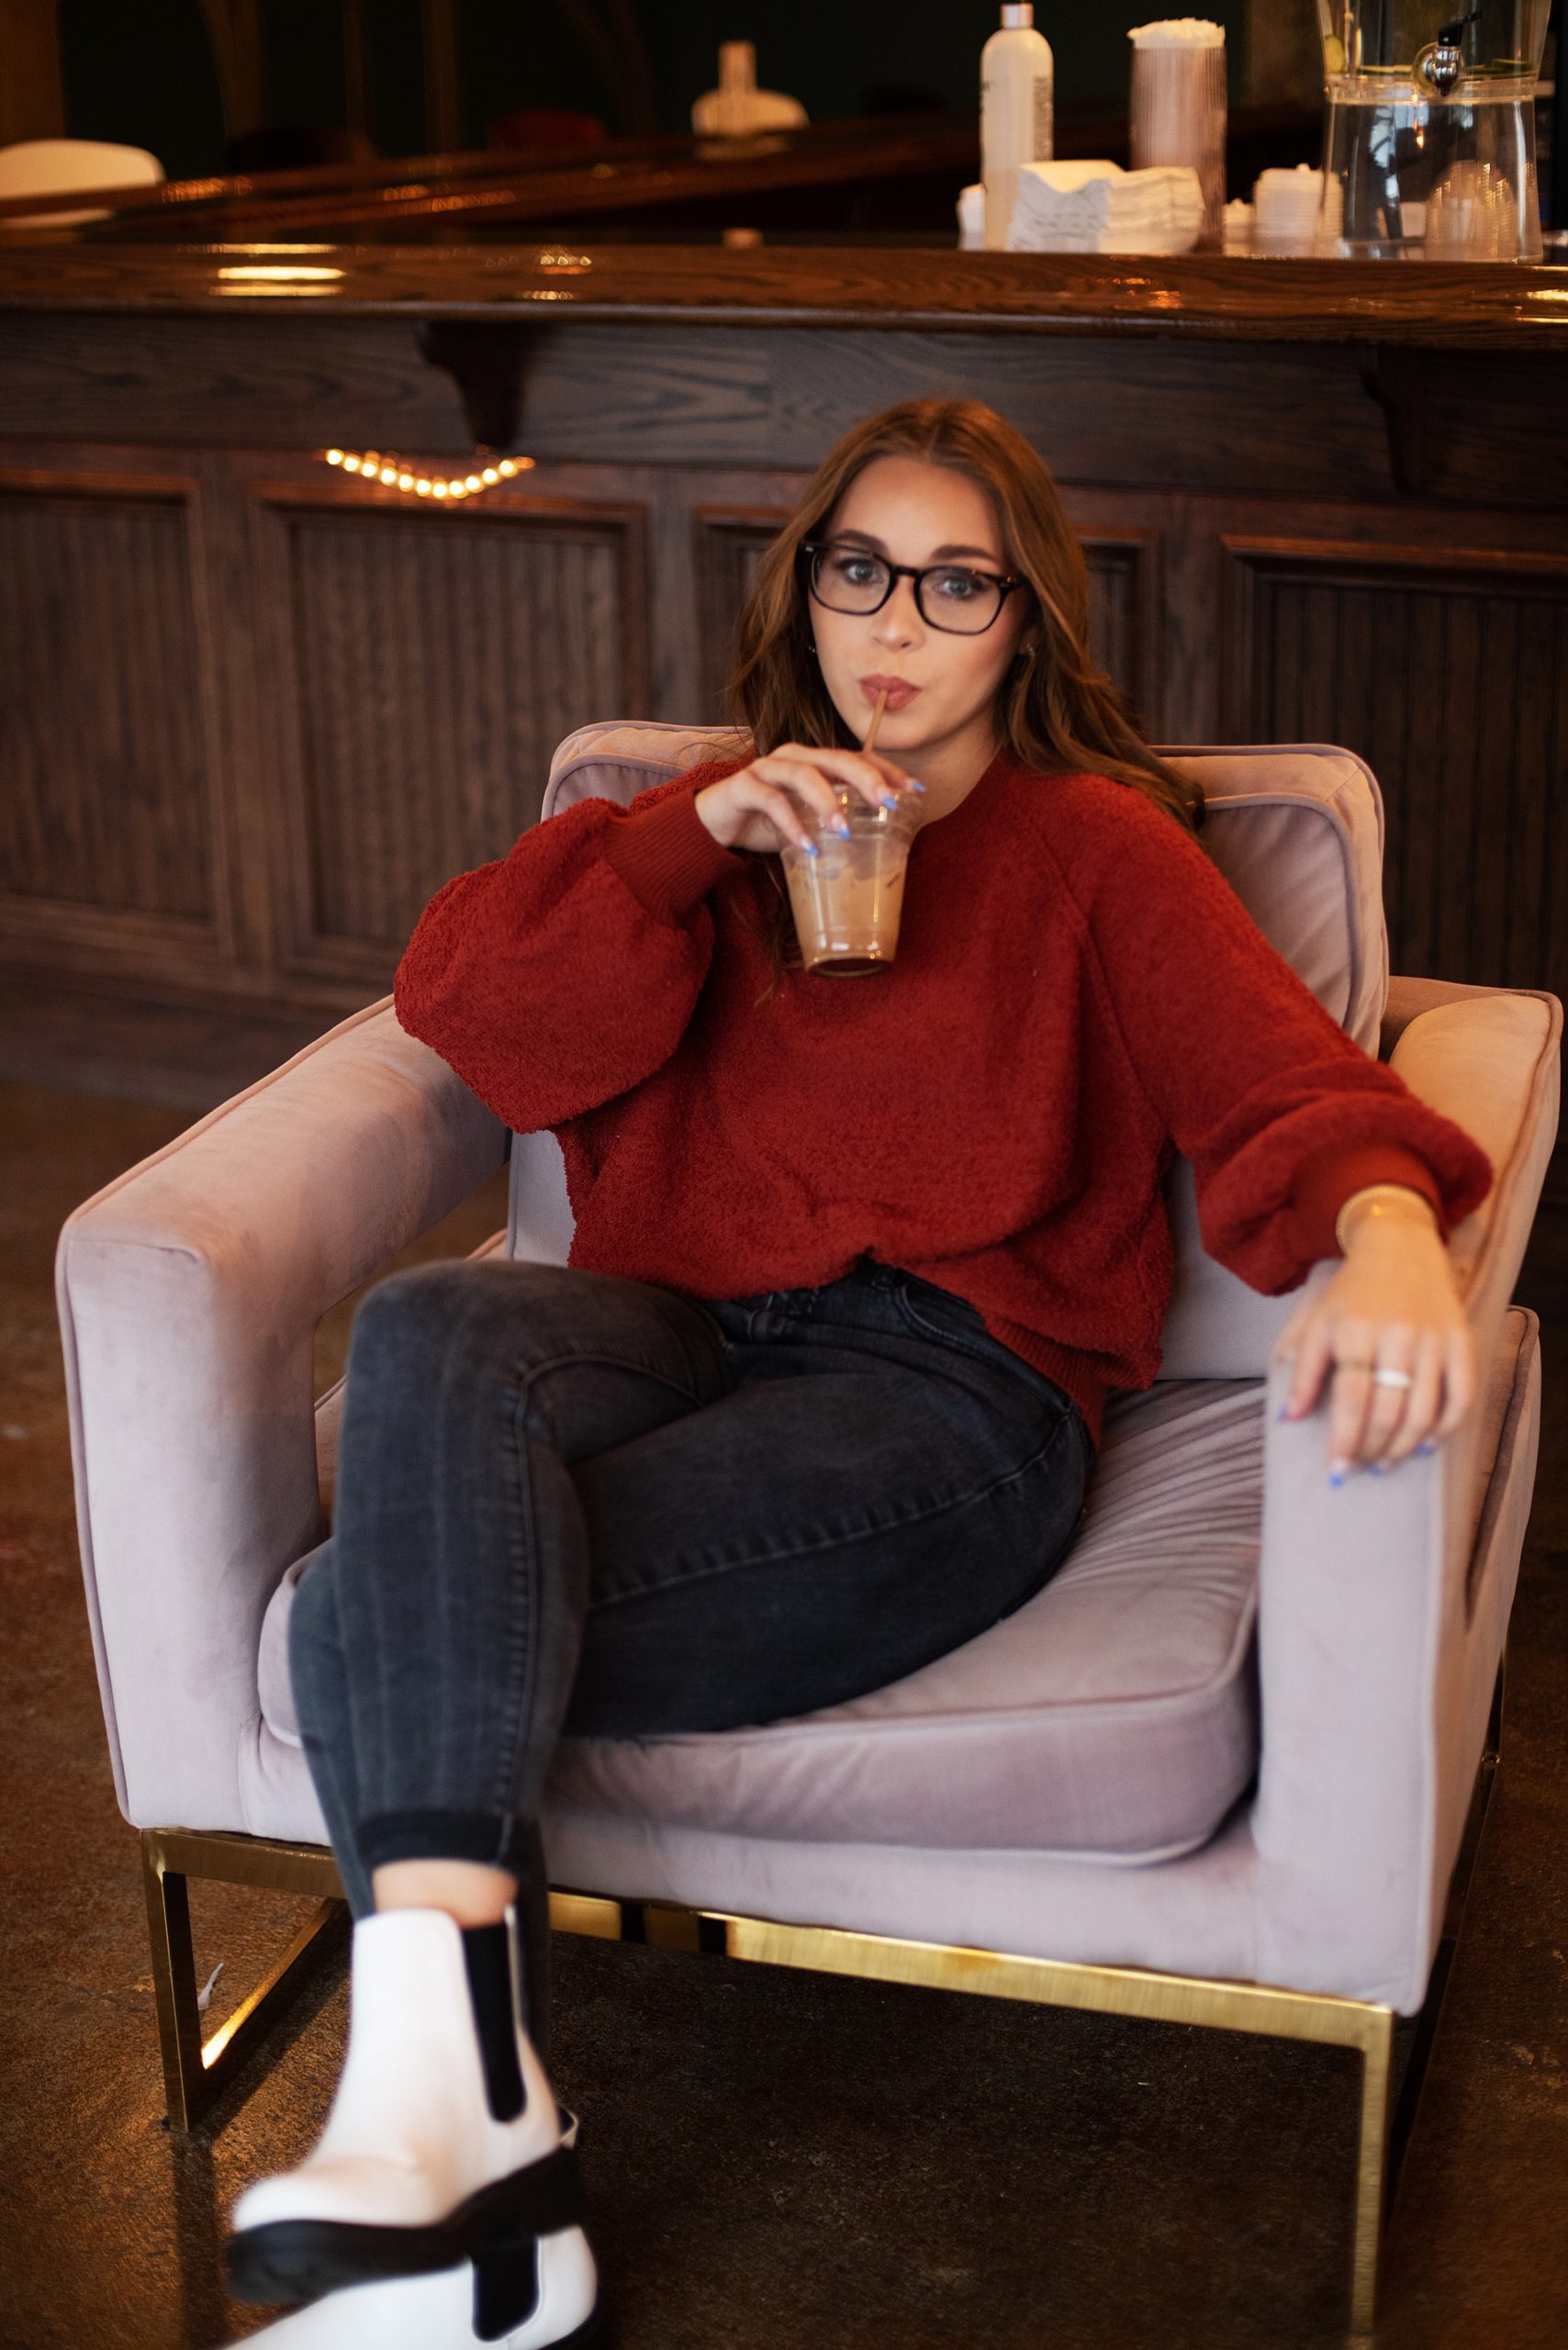 high school senior girl in black jeans, white boots, maroon top, sitting in pink chair sipping coffee senior pictures